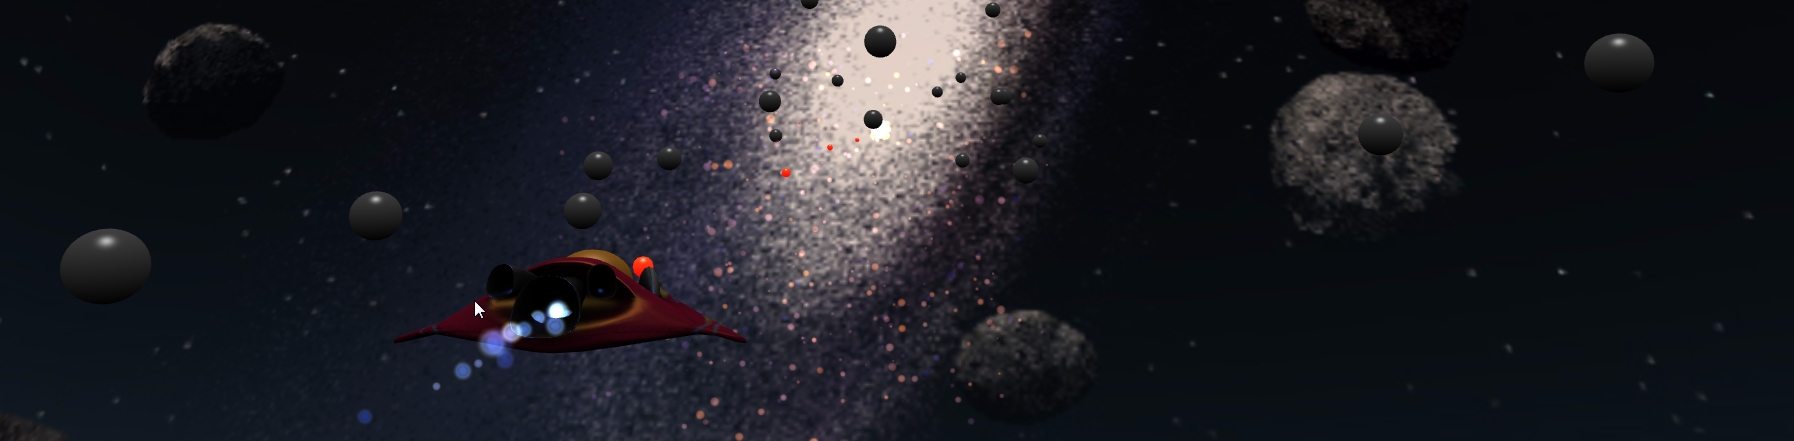 Asteroid Game Image